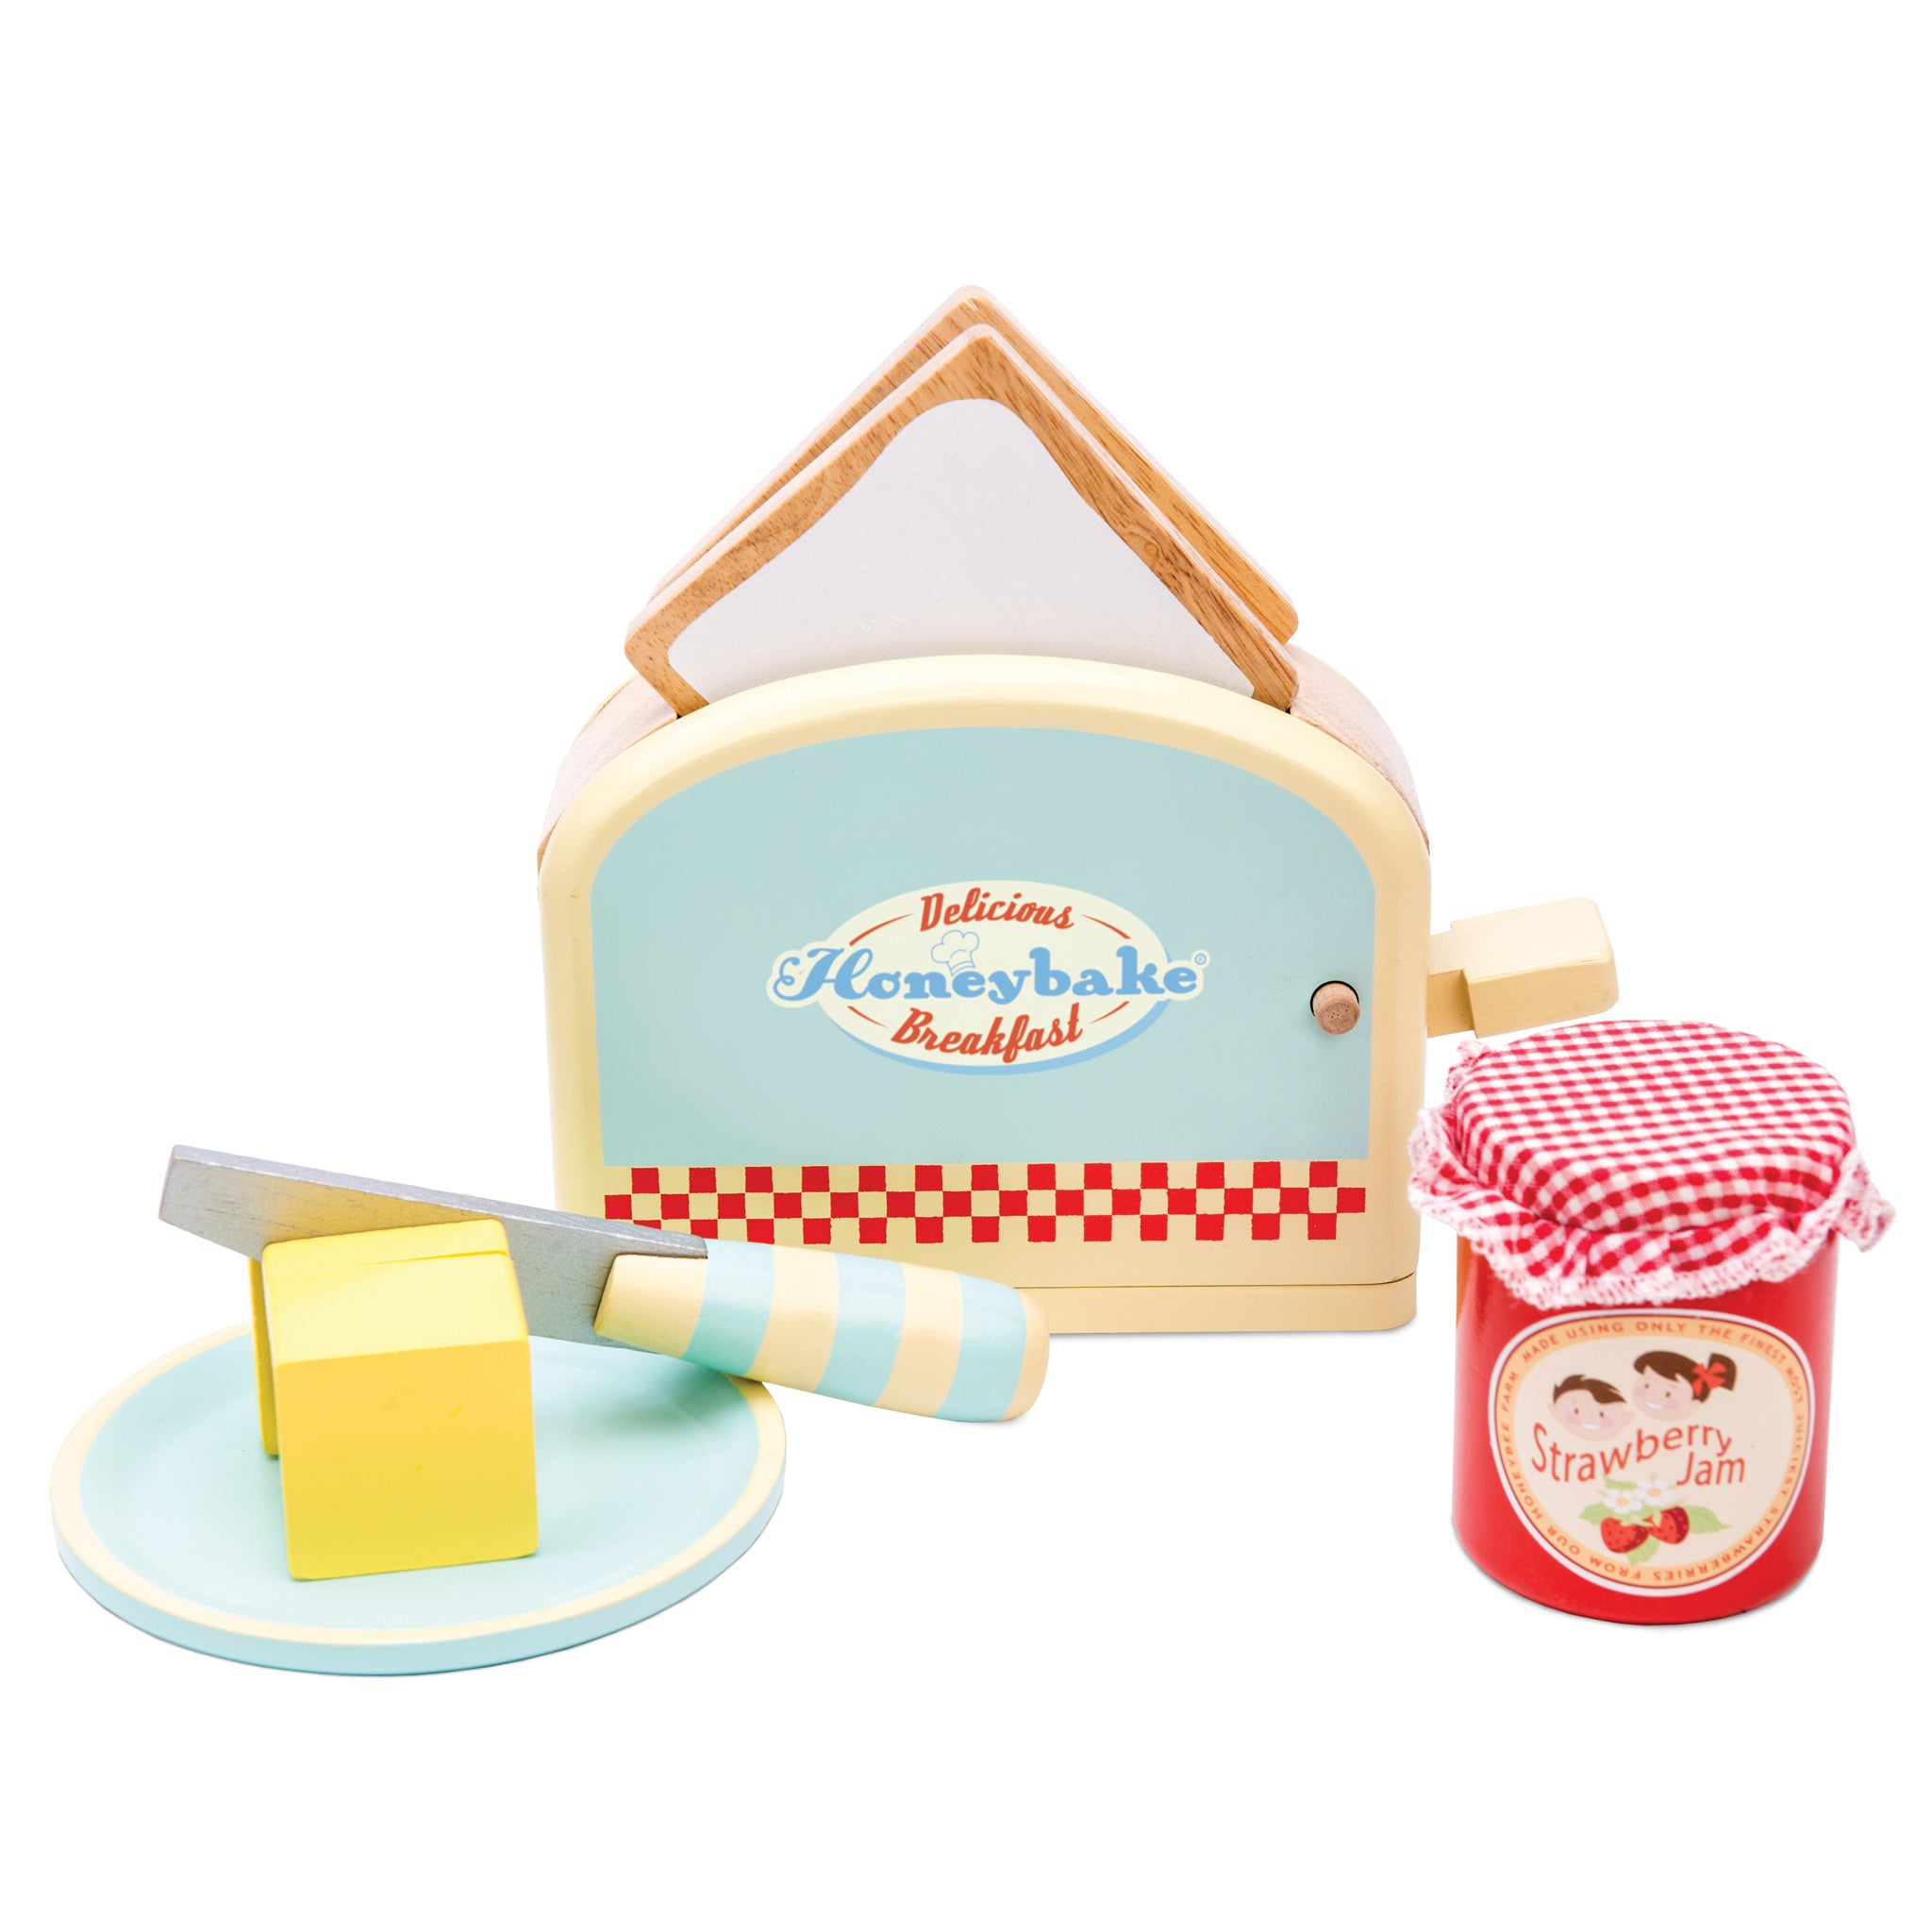 Pop-up Toaster and Breakfast Set